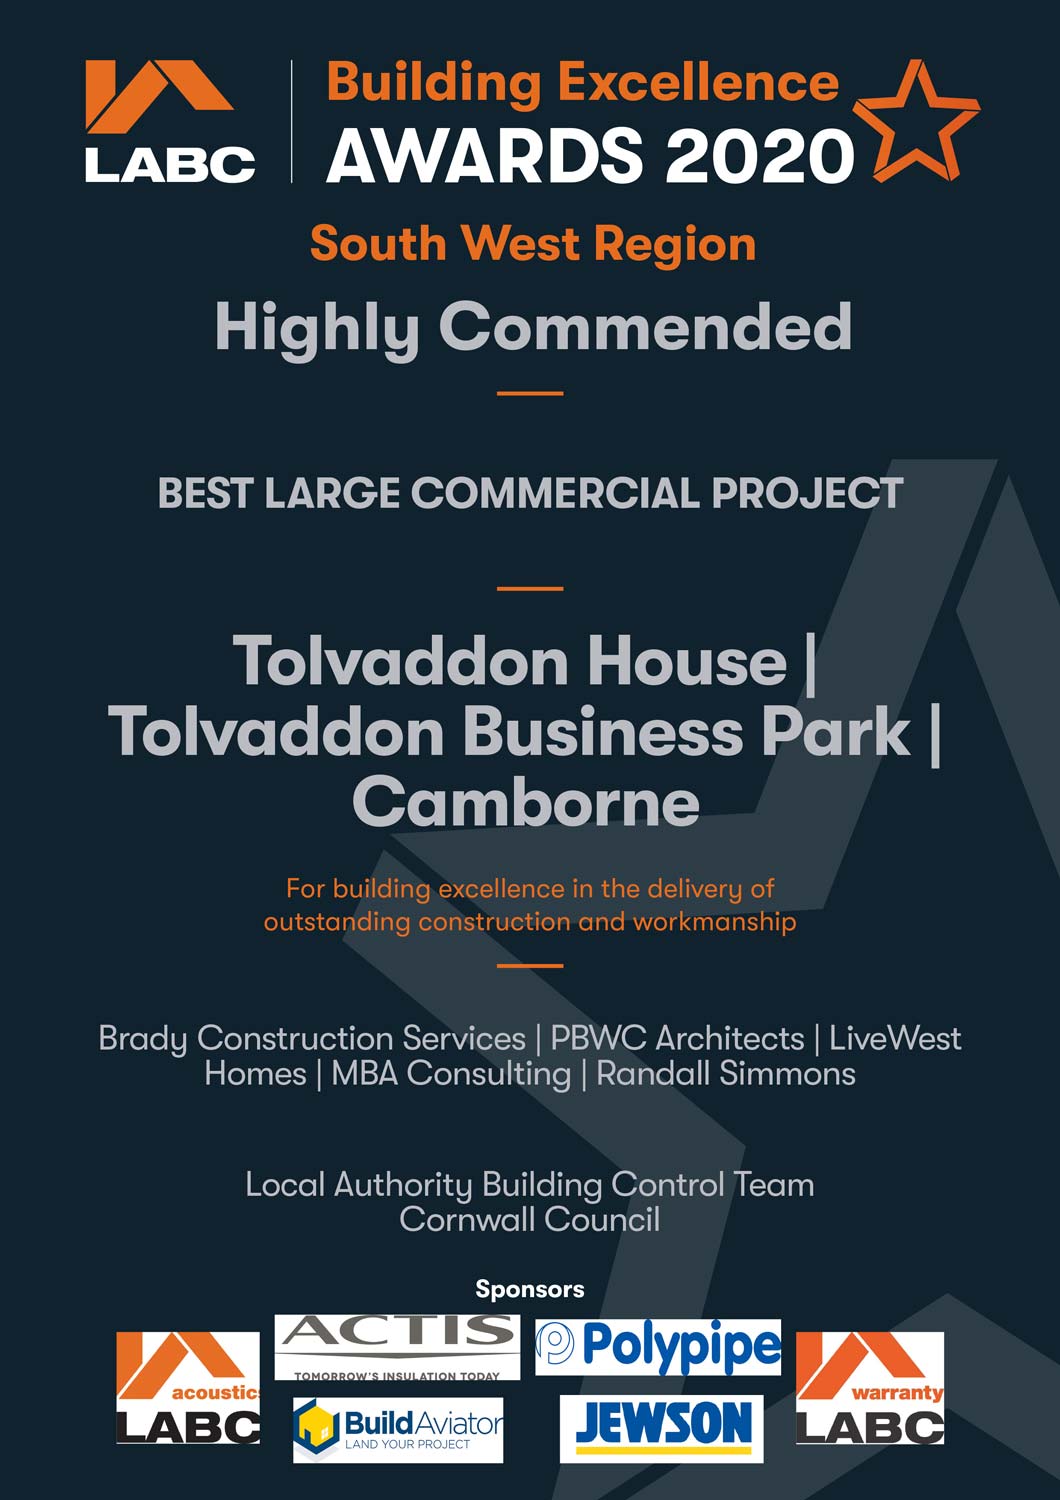 LABC Building Excellence Awards from 2020